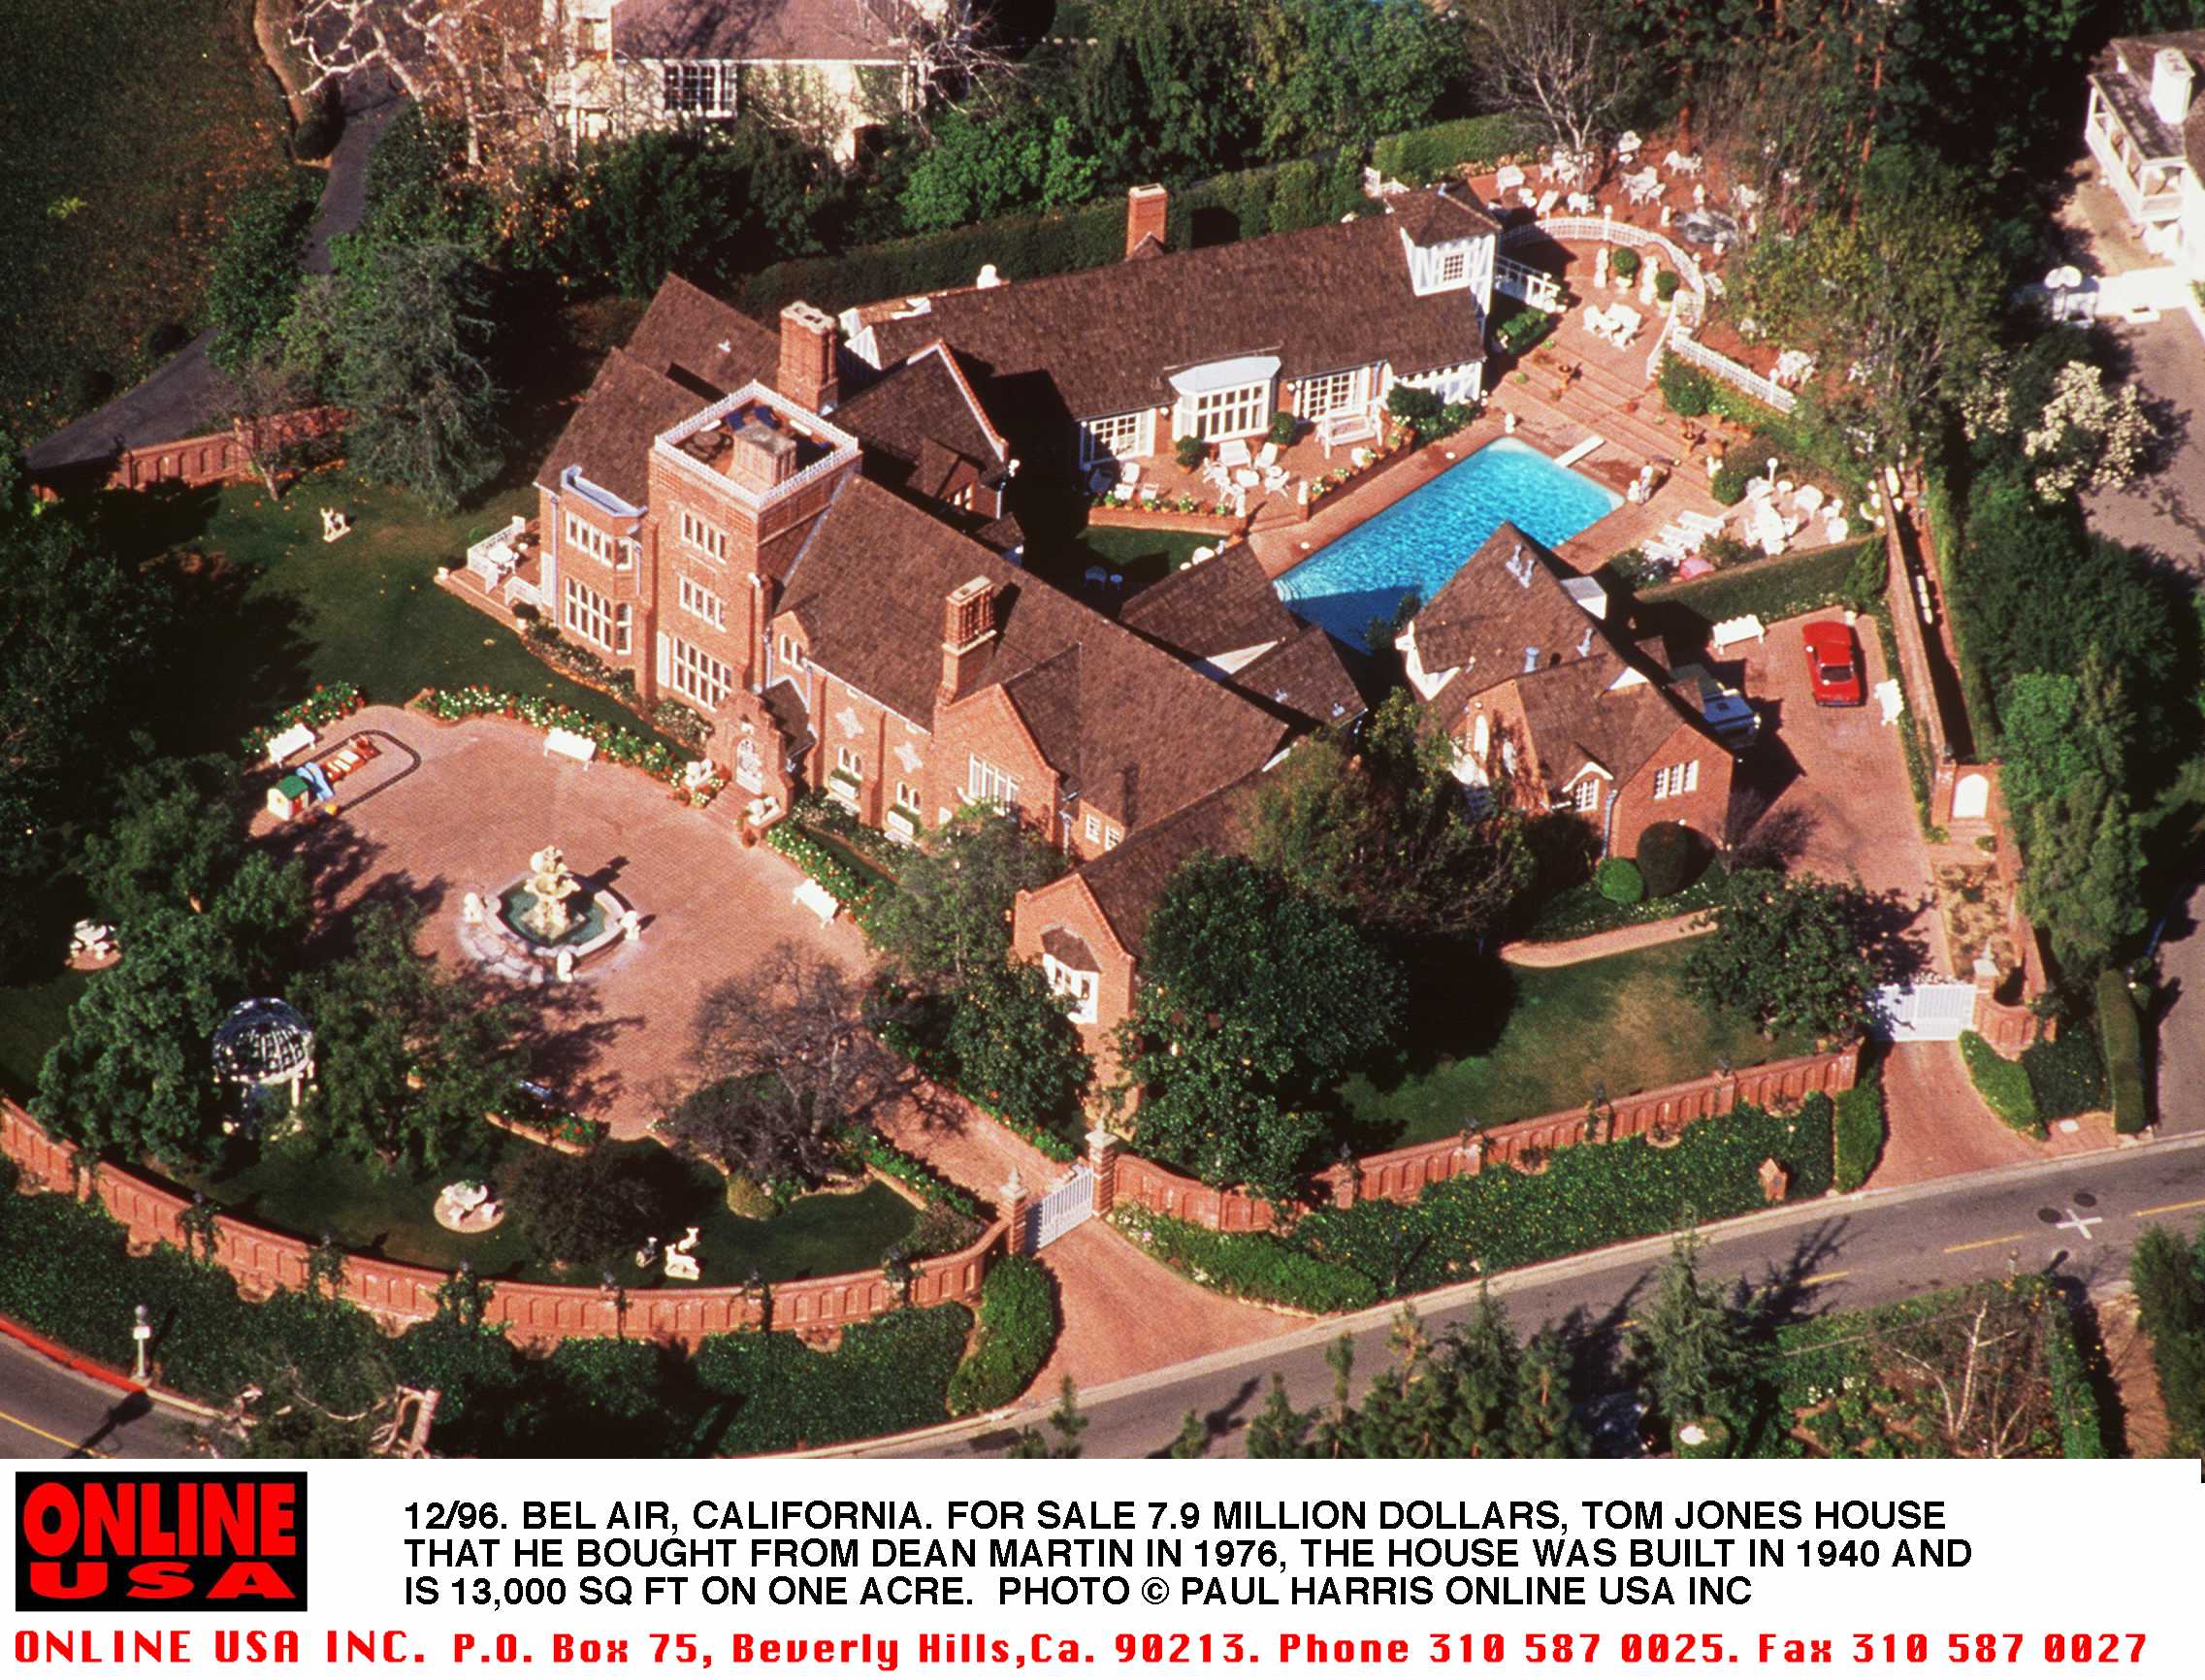 An aerial view of Tom Jones' Bel Air mansion he bought from Dean Martin | Source: Getty Images